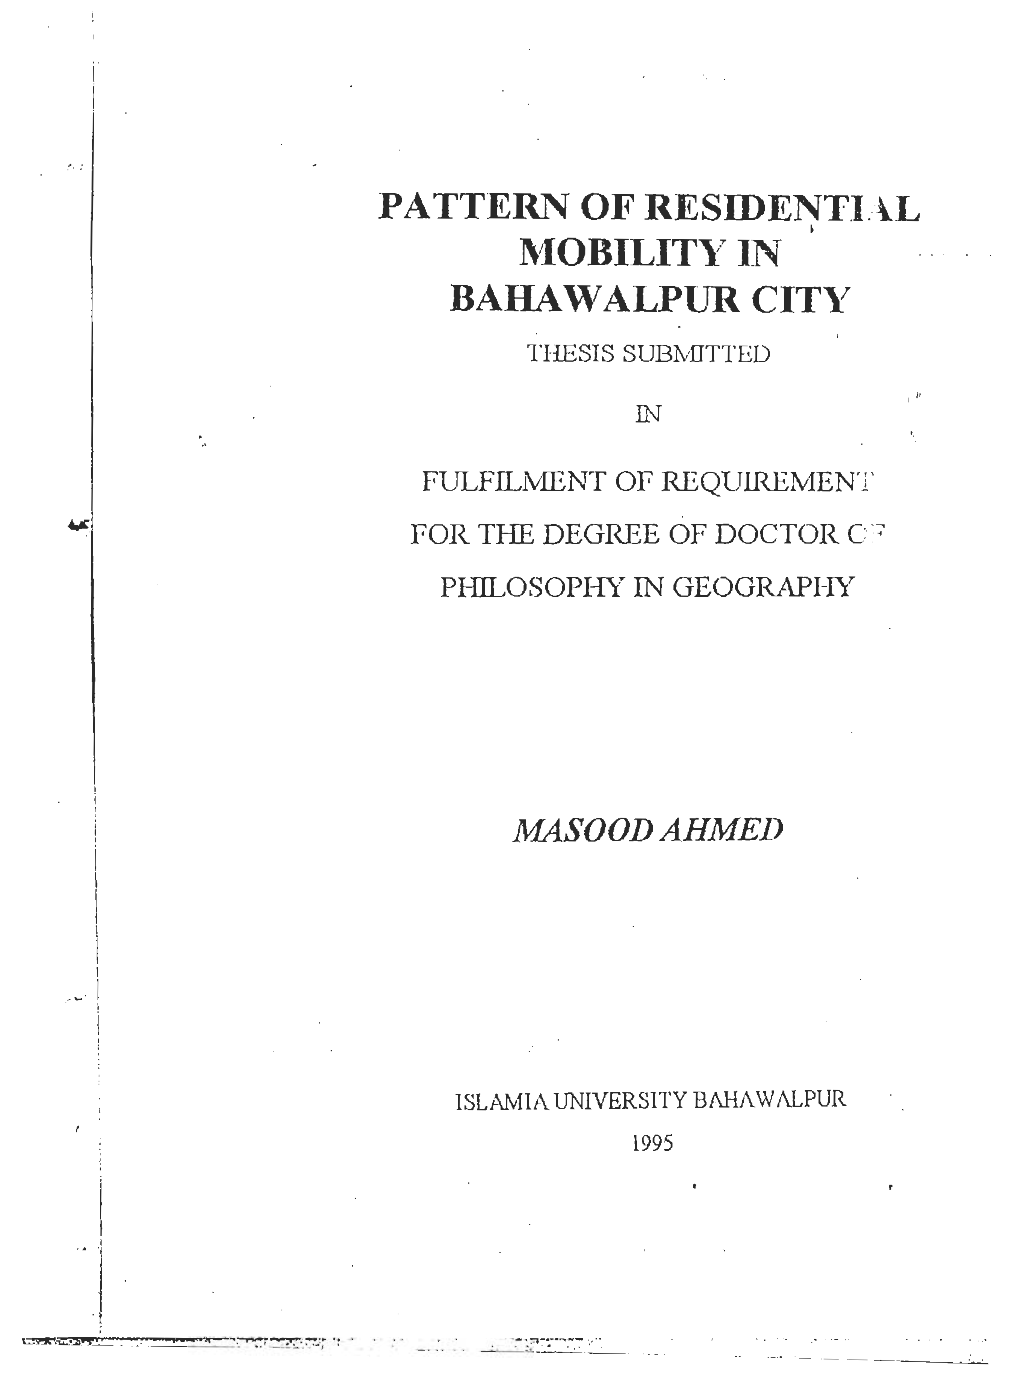 Bahawalpur City Thesis Submitted